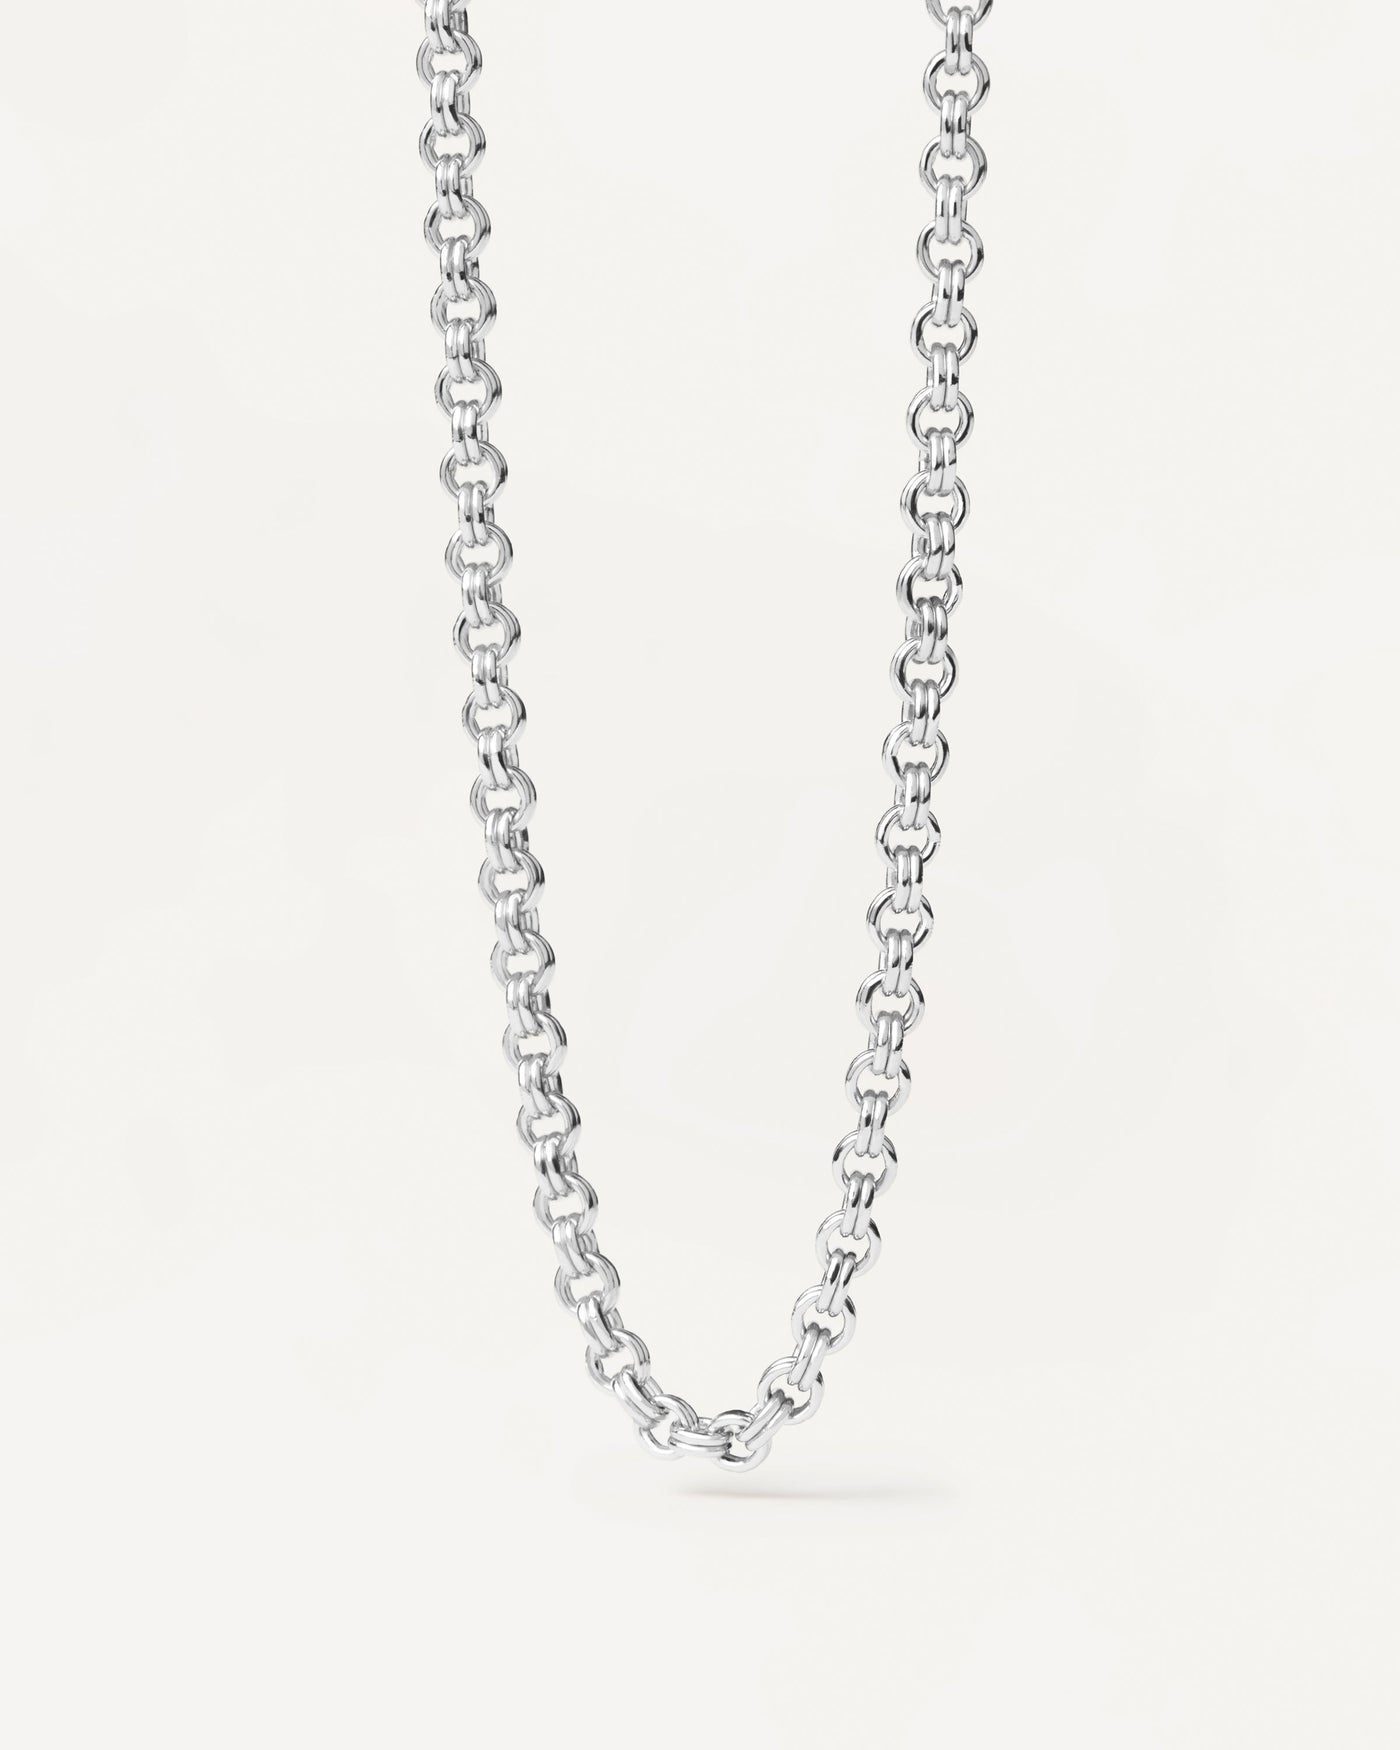 2023 Selection | Neo Silver Necklace. 925 silver chain necklace with double cable links. Get the latest arrival from PDPAOLA. Place your order safely and get this Best Seller. Free Shipping.